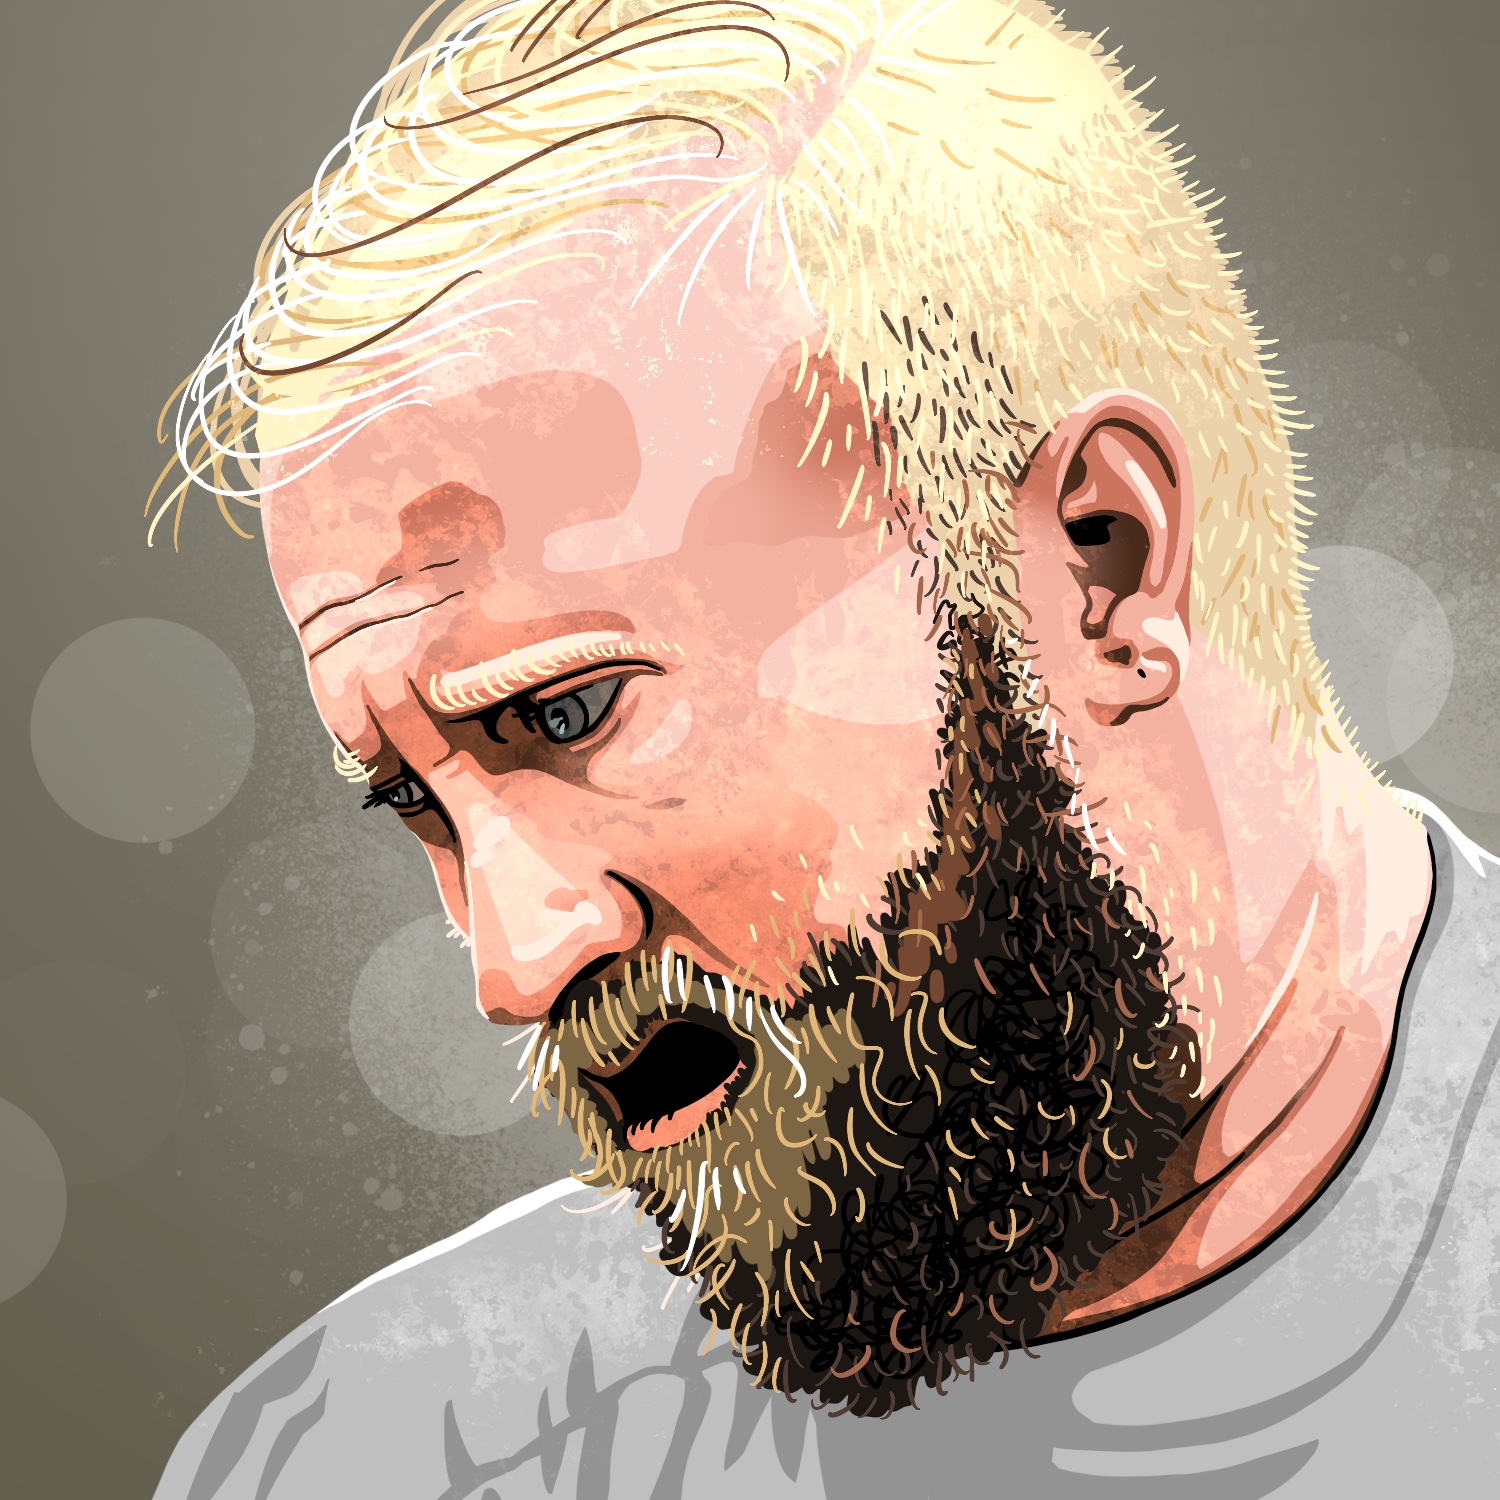 An illustration of a man looking down to the left in disappointment. The man has a light complexion and thin blond hair. He has a large beard that is dark at the roots and goes blond around his mouth and red up towards his ears. His mouth is slightly agape, and his face is in shadow. He has on a gray top and the background is just a dull, grayish-olive color with a faint, splattered glow.